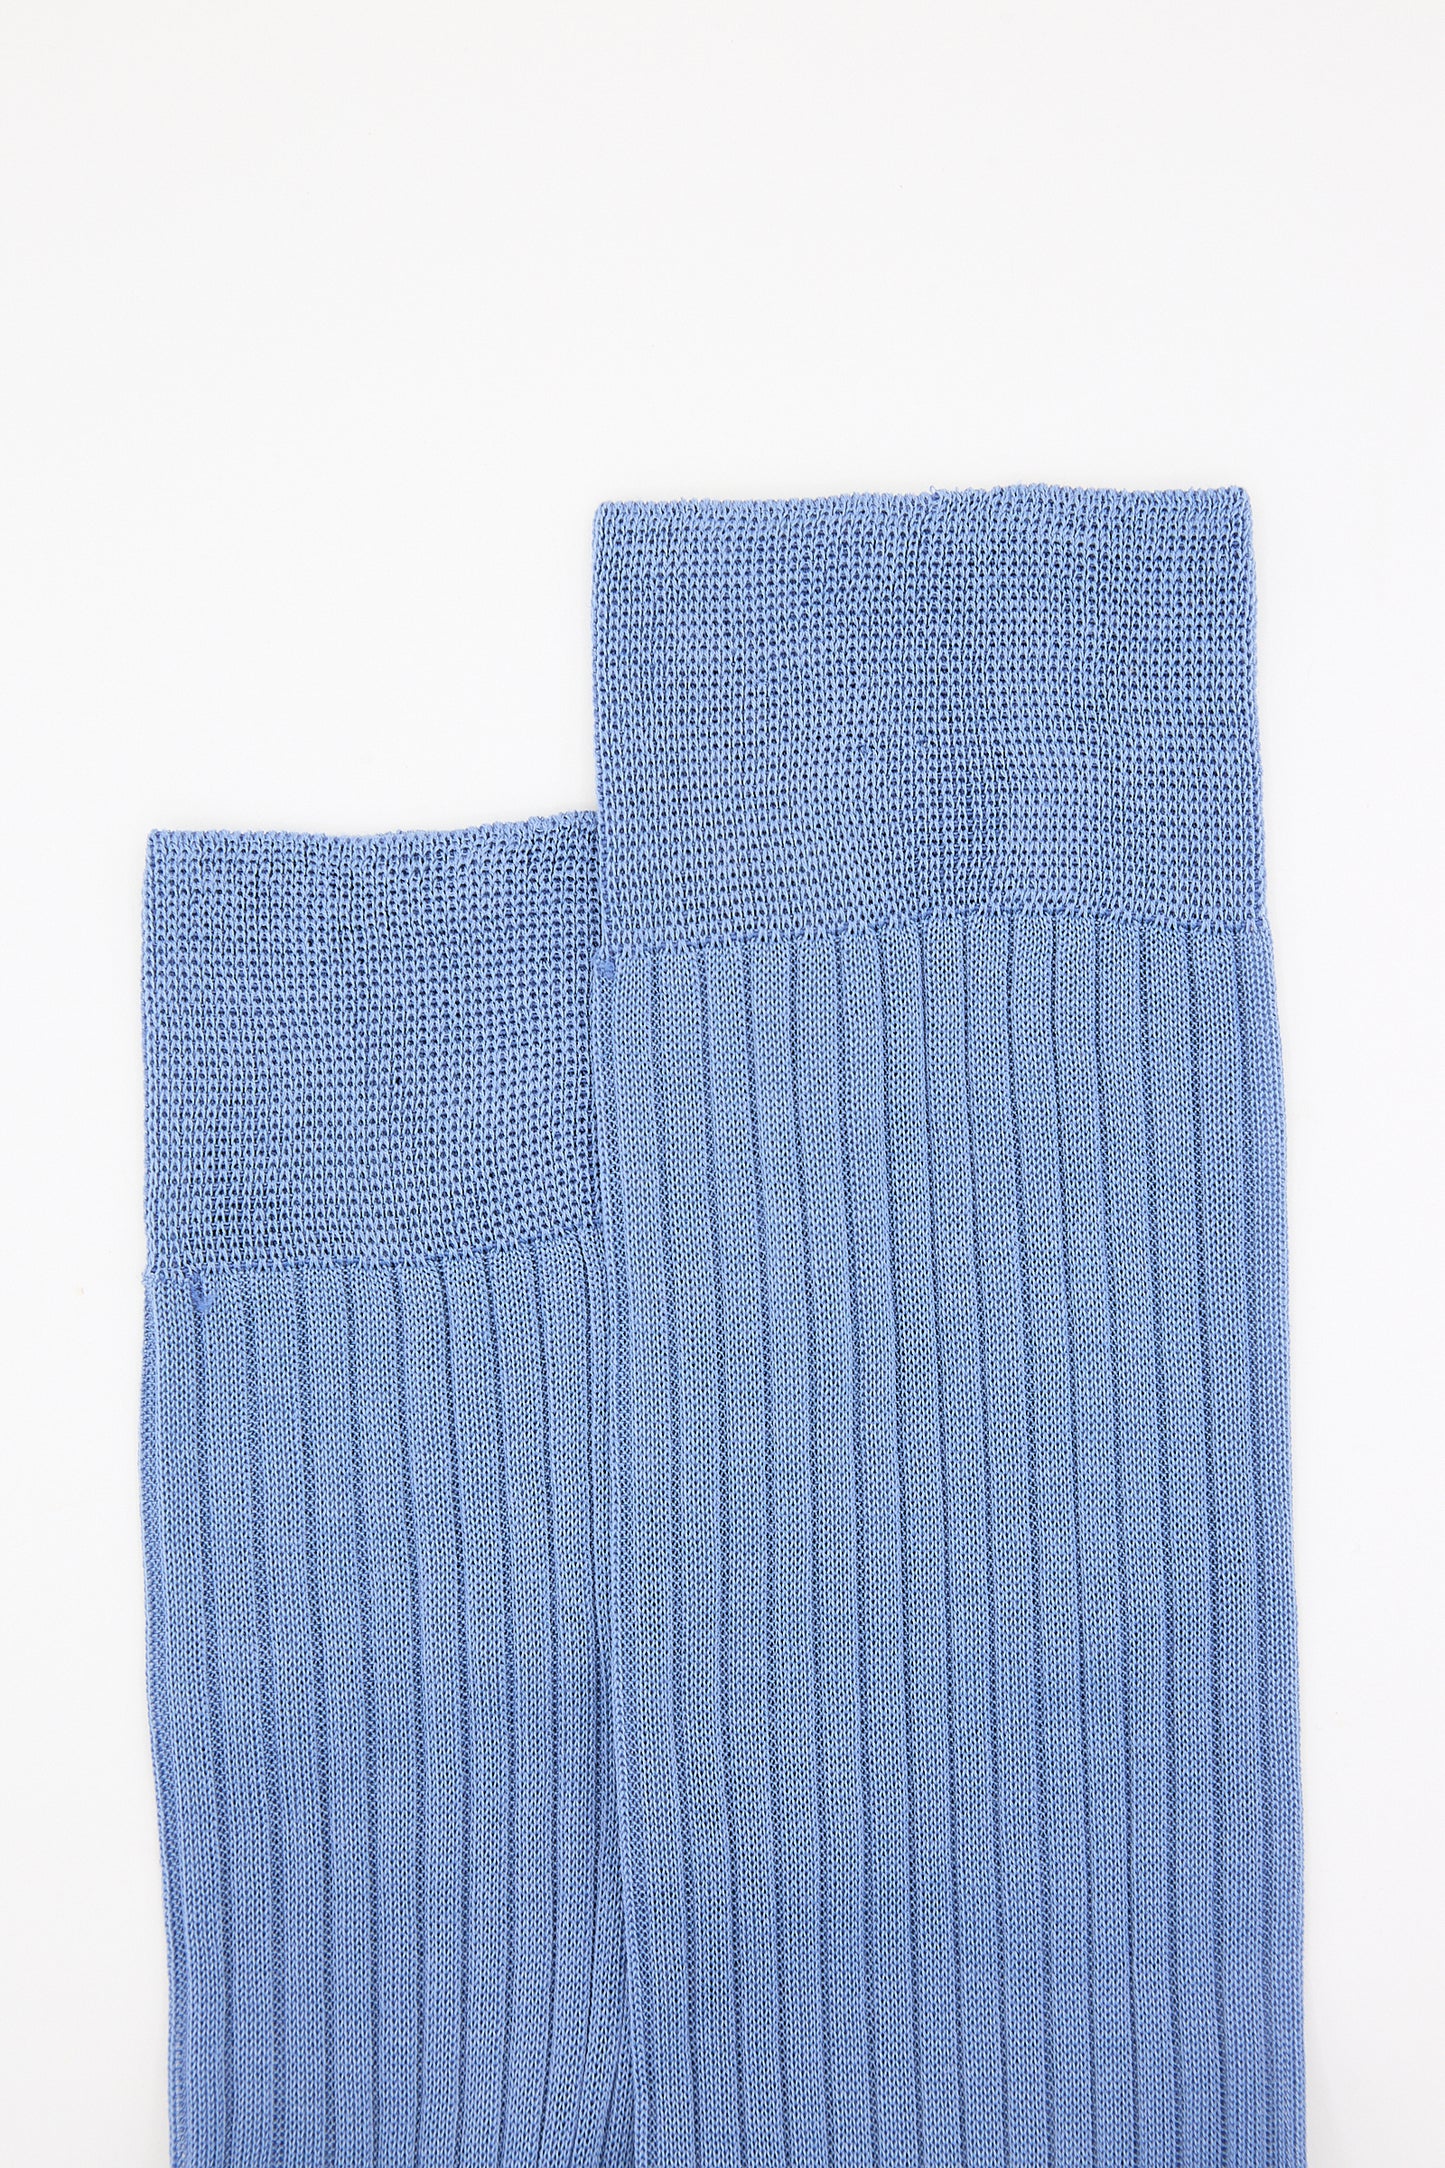 Two folded blue knit sweaters and a pair of Maria La Rosa Rib Socks in Light Blue on a white background.